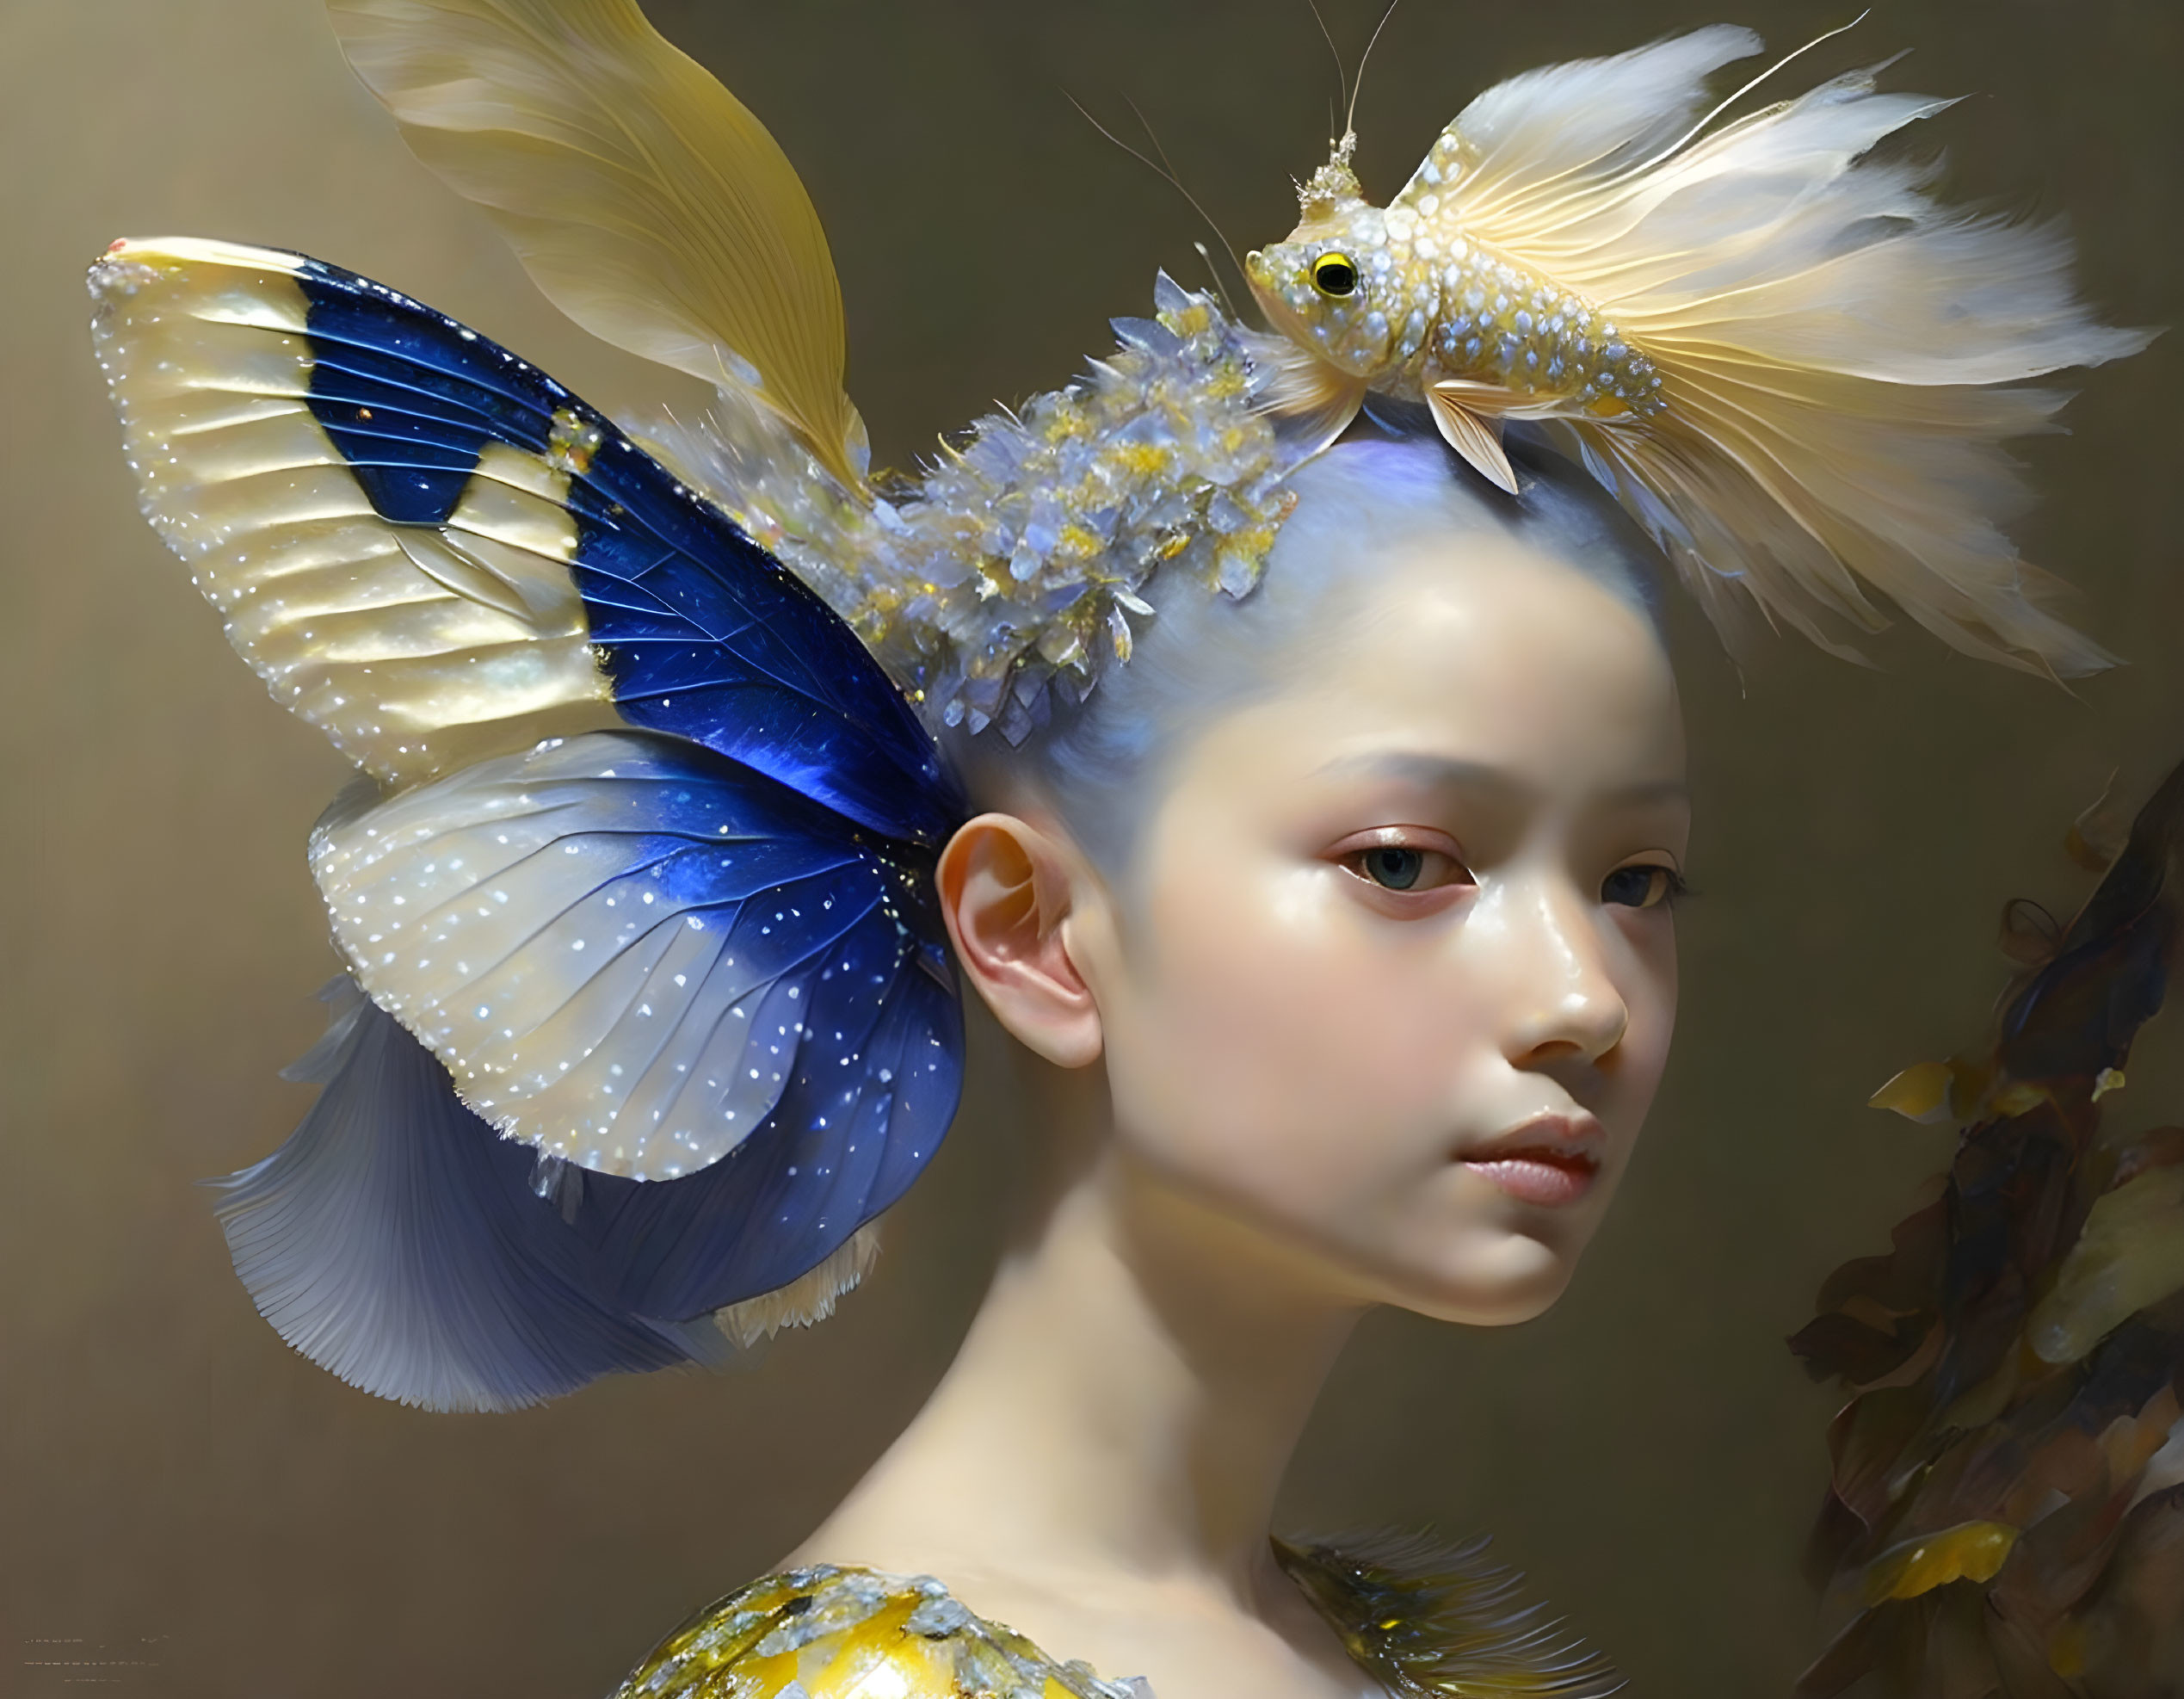 The Butterfly Fish Girl